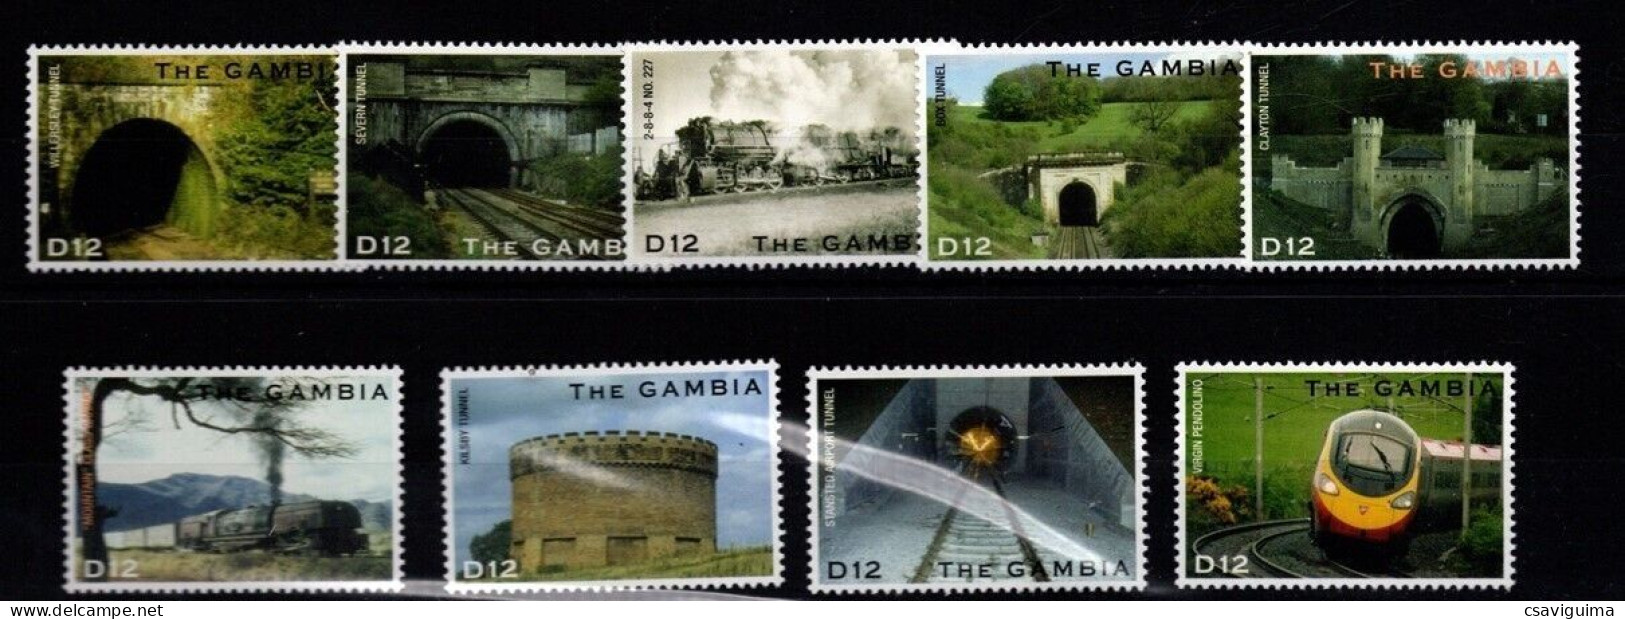 Gambia - 2004 - Trains: 200 Years Steam Locomotives - Yv 4296/00 (from Sheet) - Trains